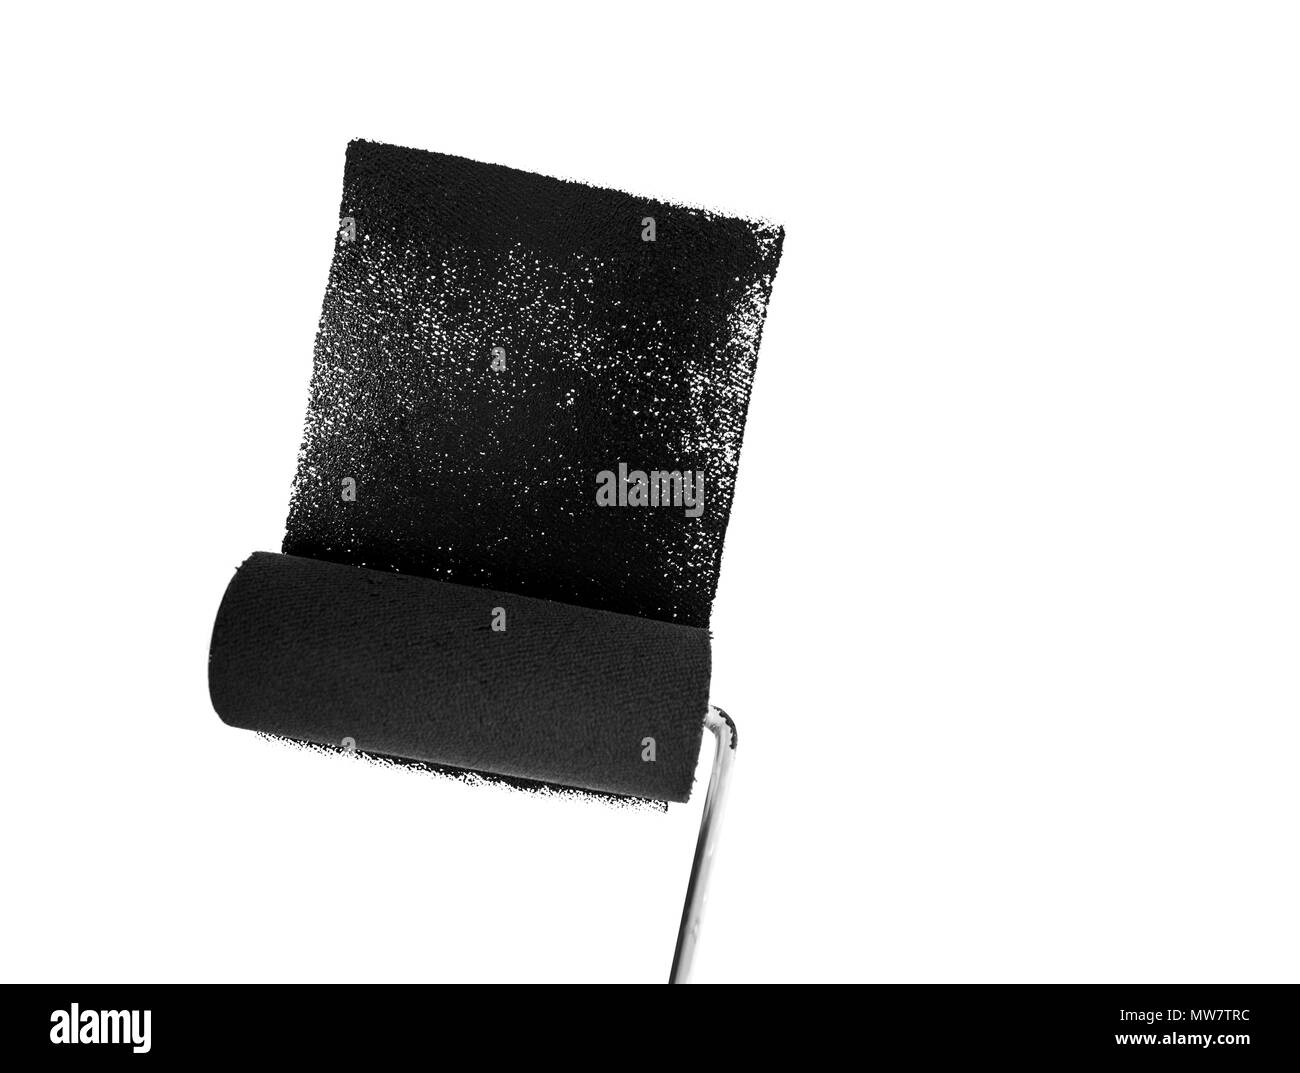 Painting wall in black with a paint roller Stock Photo